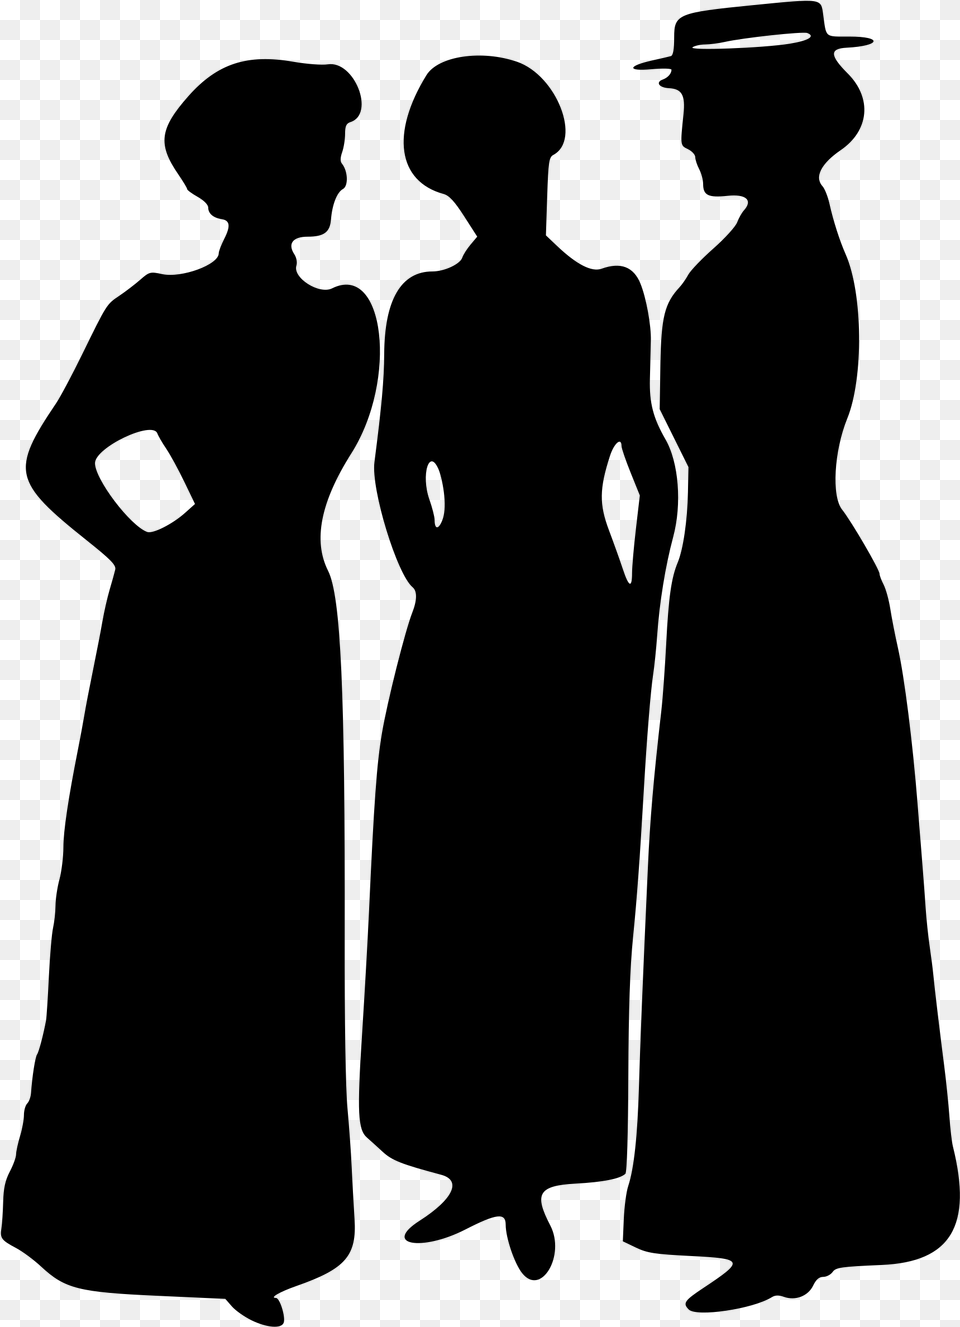 Chat Chatting Clique Ladies Image Woman Victorian Silhouette, Gray Free Png Download